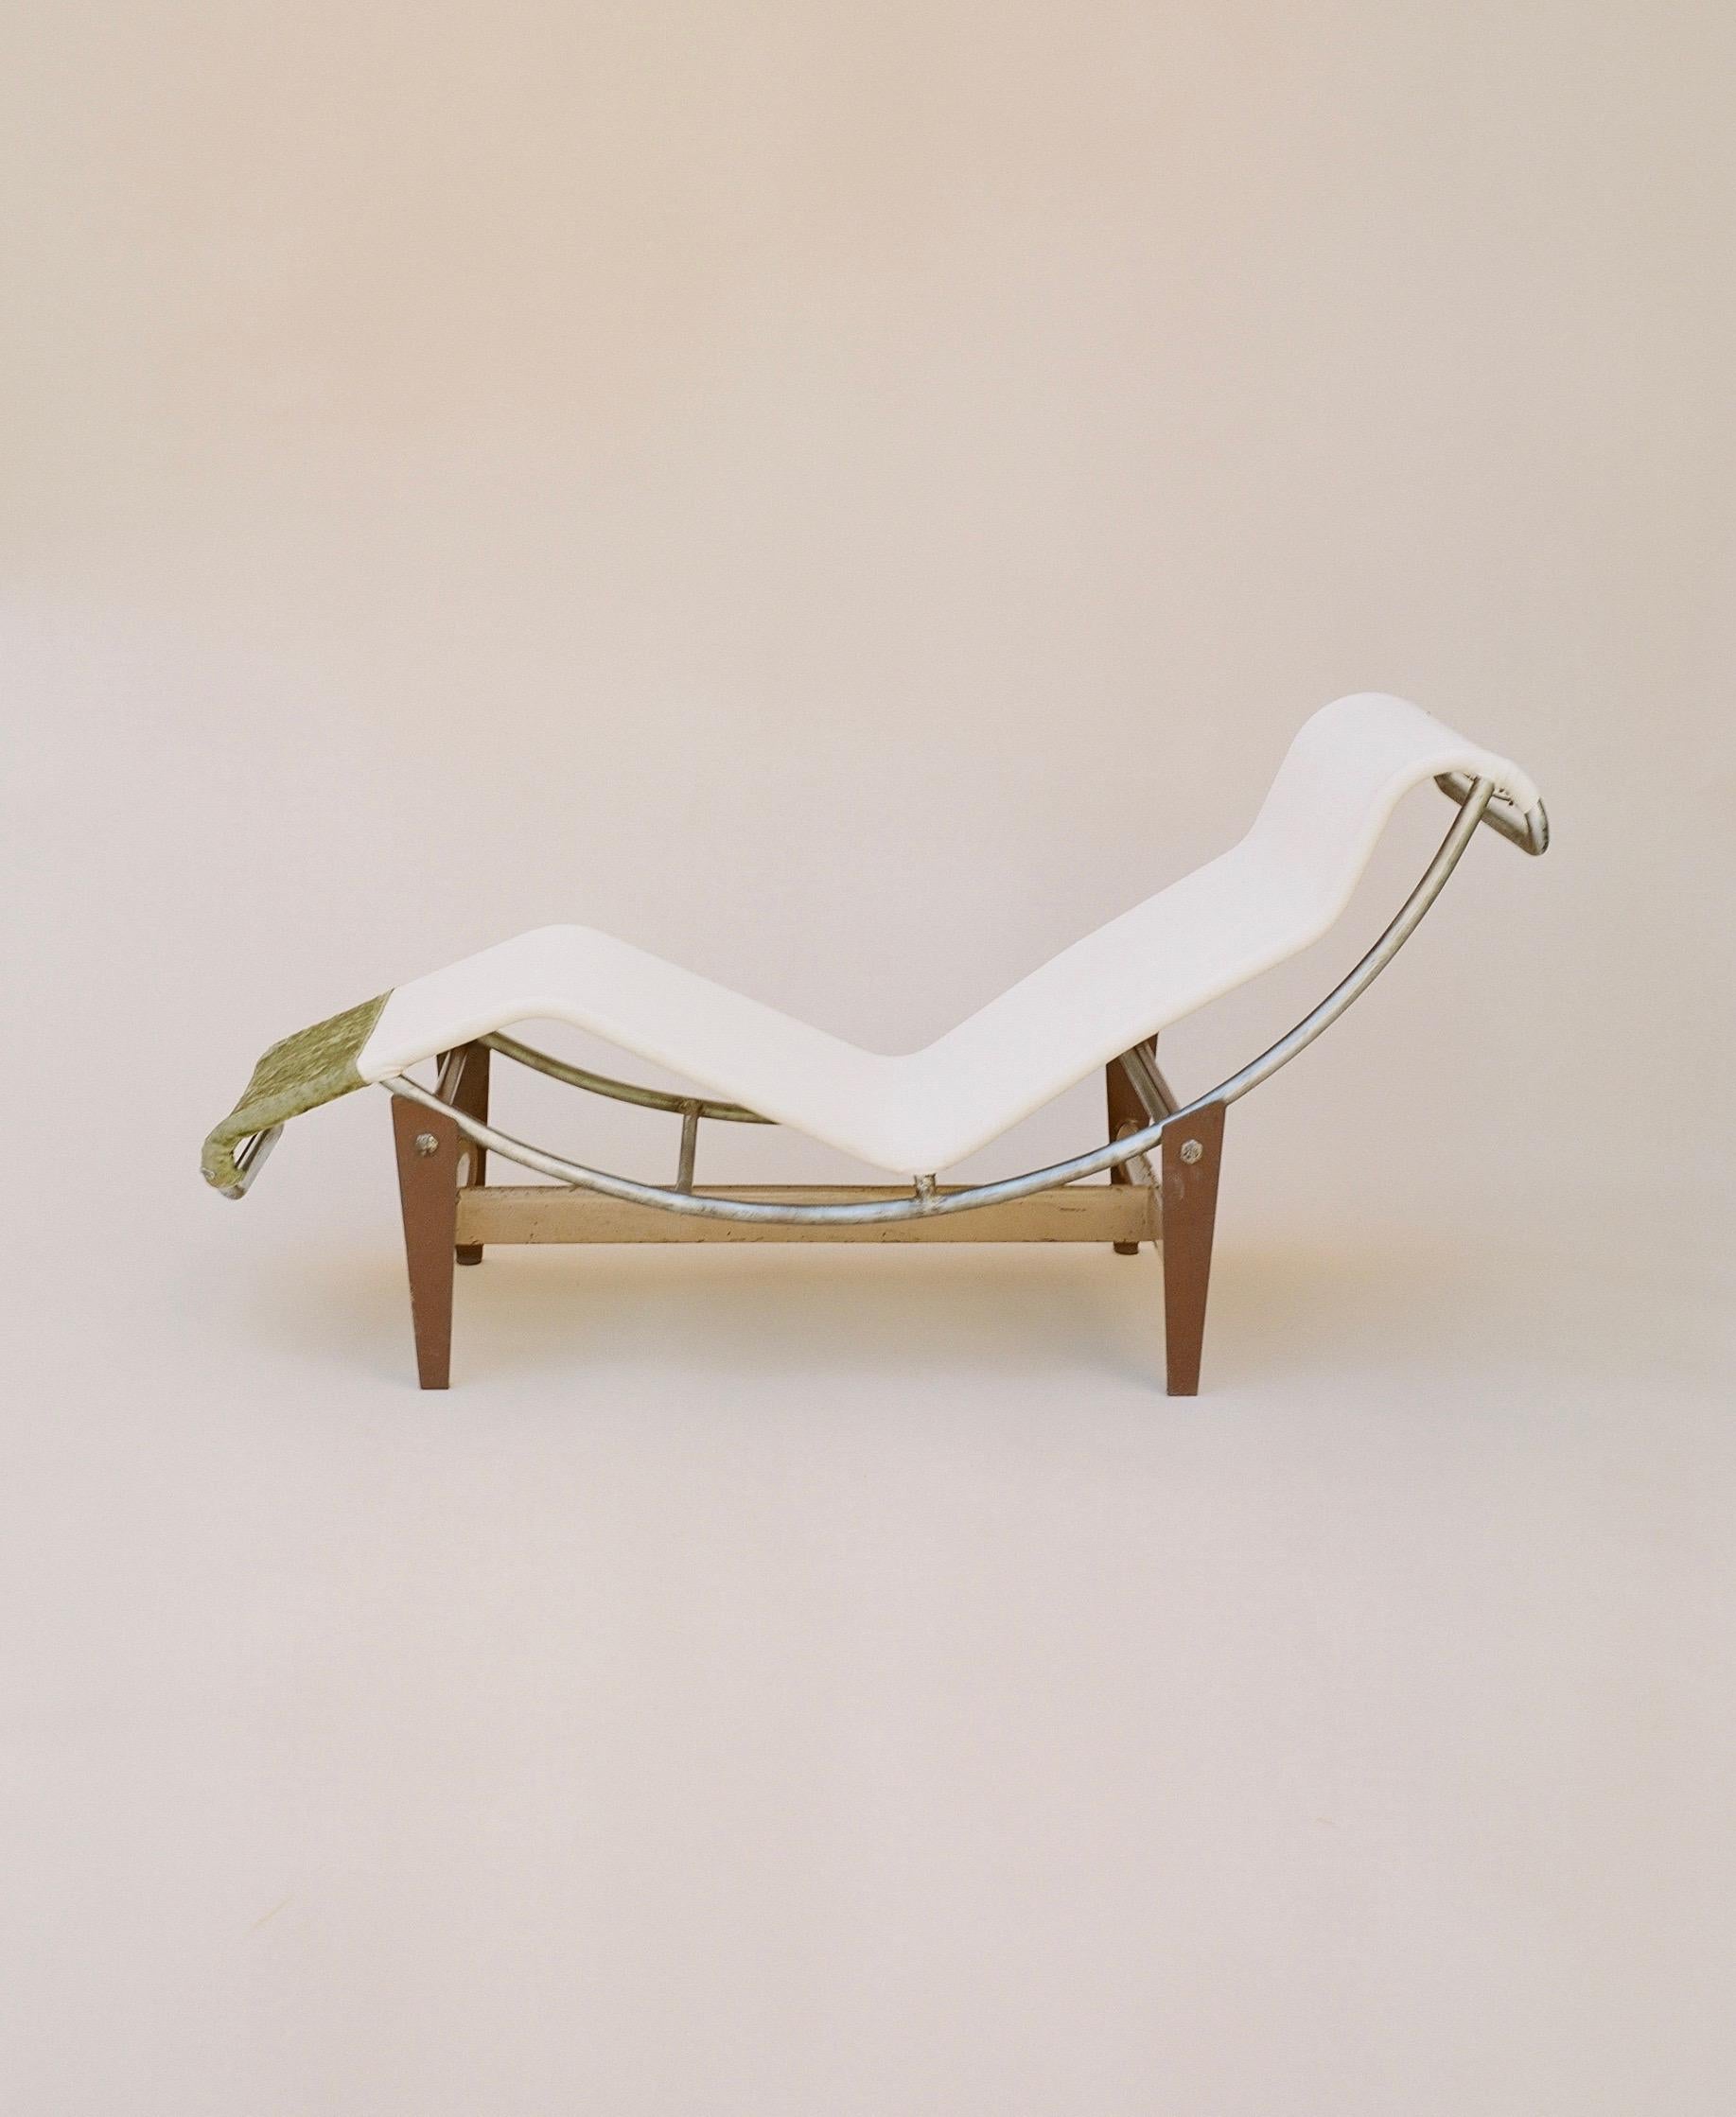 At the age of 24, Charlotte Perriand joined Le Corbusier and Jeanneret’s studio focusing primarily on furniture for their architectural projects. This is one of the chairs she designed for their firm, to serve the purpose of relaxing, which would